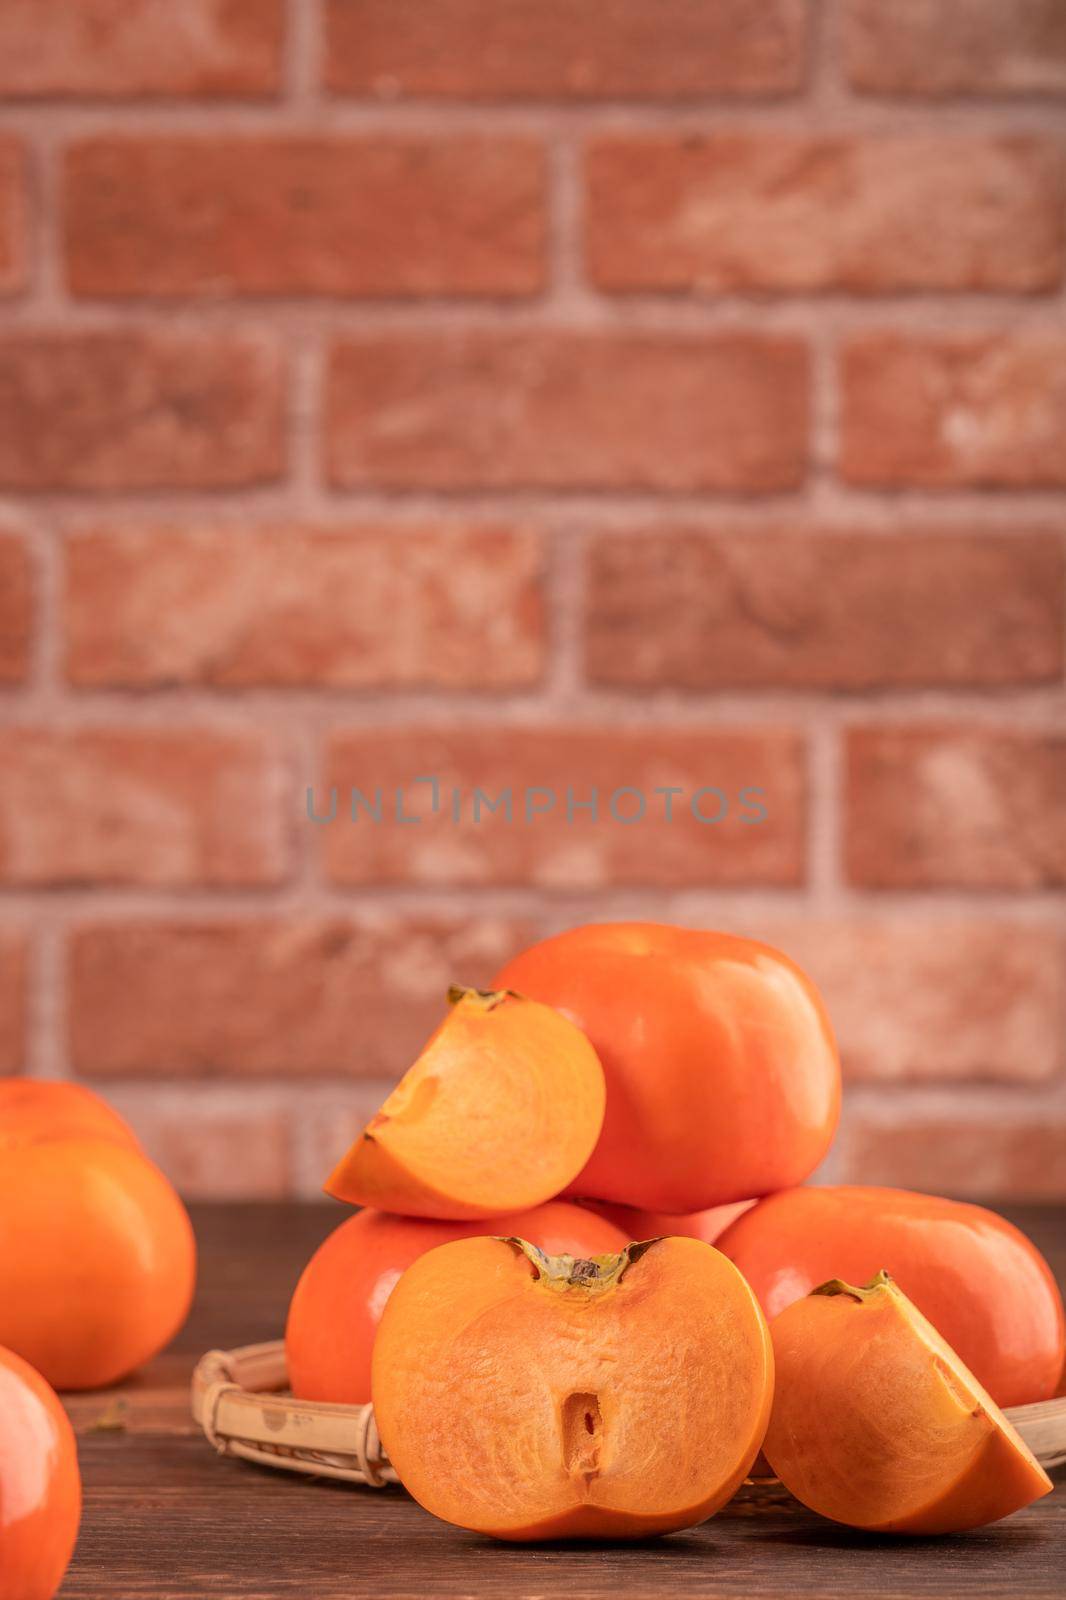 Sliced sweet persimmon kaki in a bamboo sieve basket on dark wooden table with red brick wall background, Chinese lunar new year fruit design concept, close up.